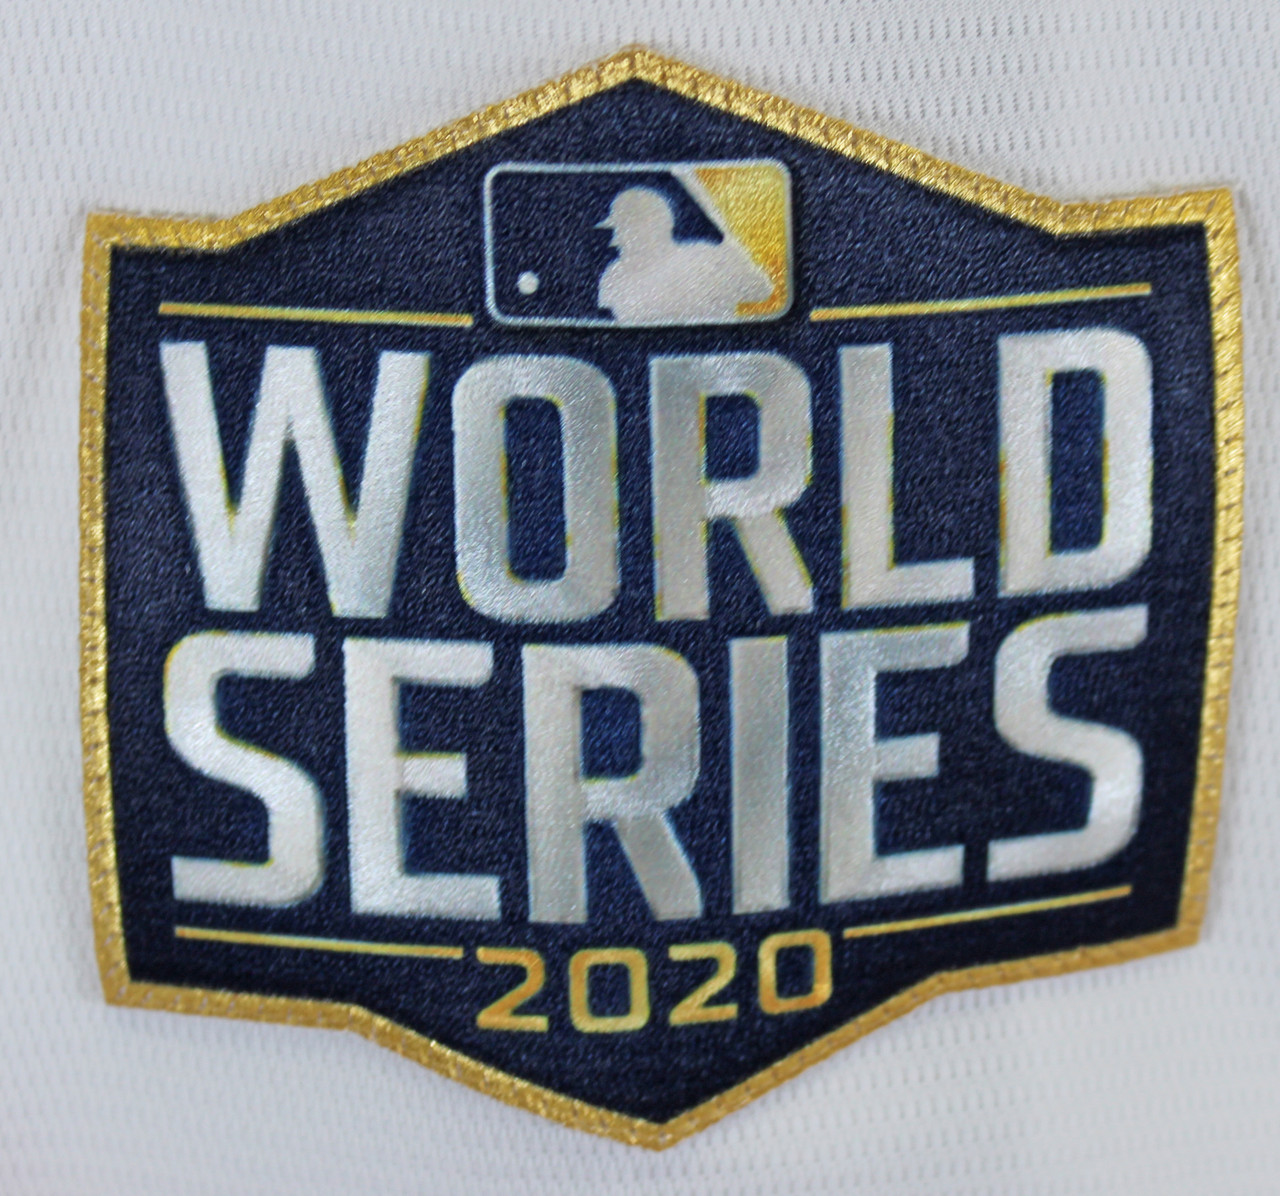 Cody Bellinger Los Angeles Dodgers Autographed 2020 MLB World Series  Champions Nike White Authentic World Series Logo Jersey